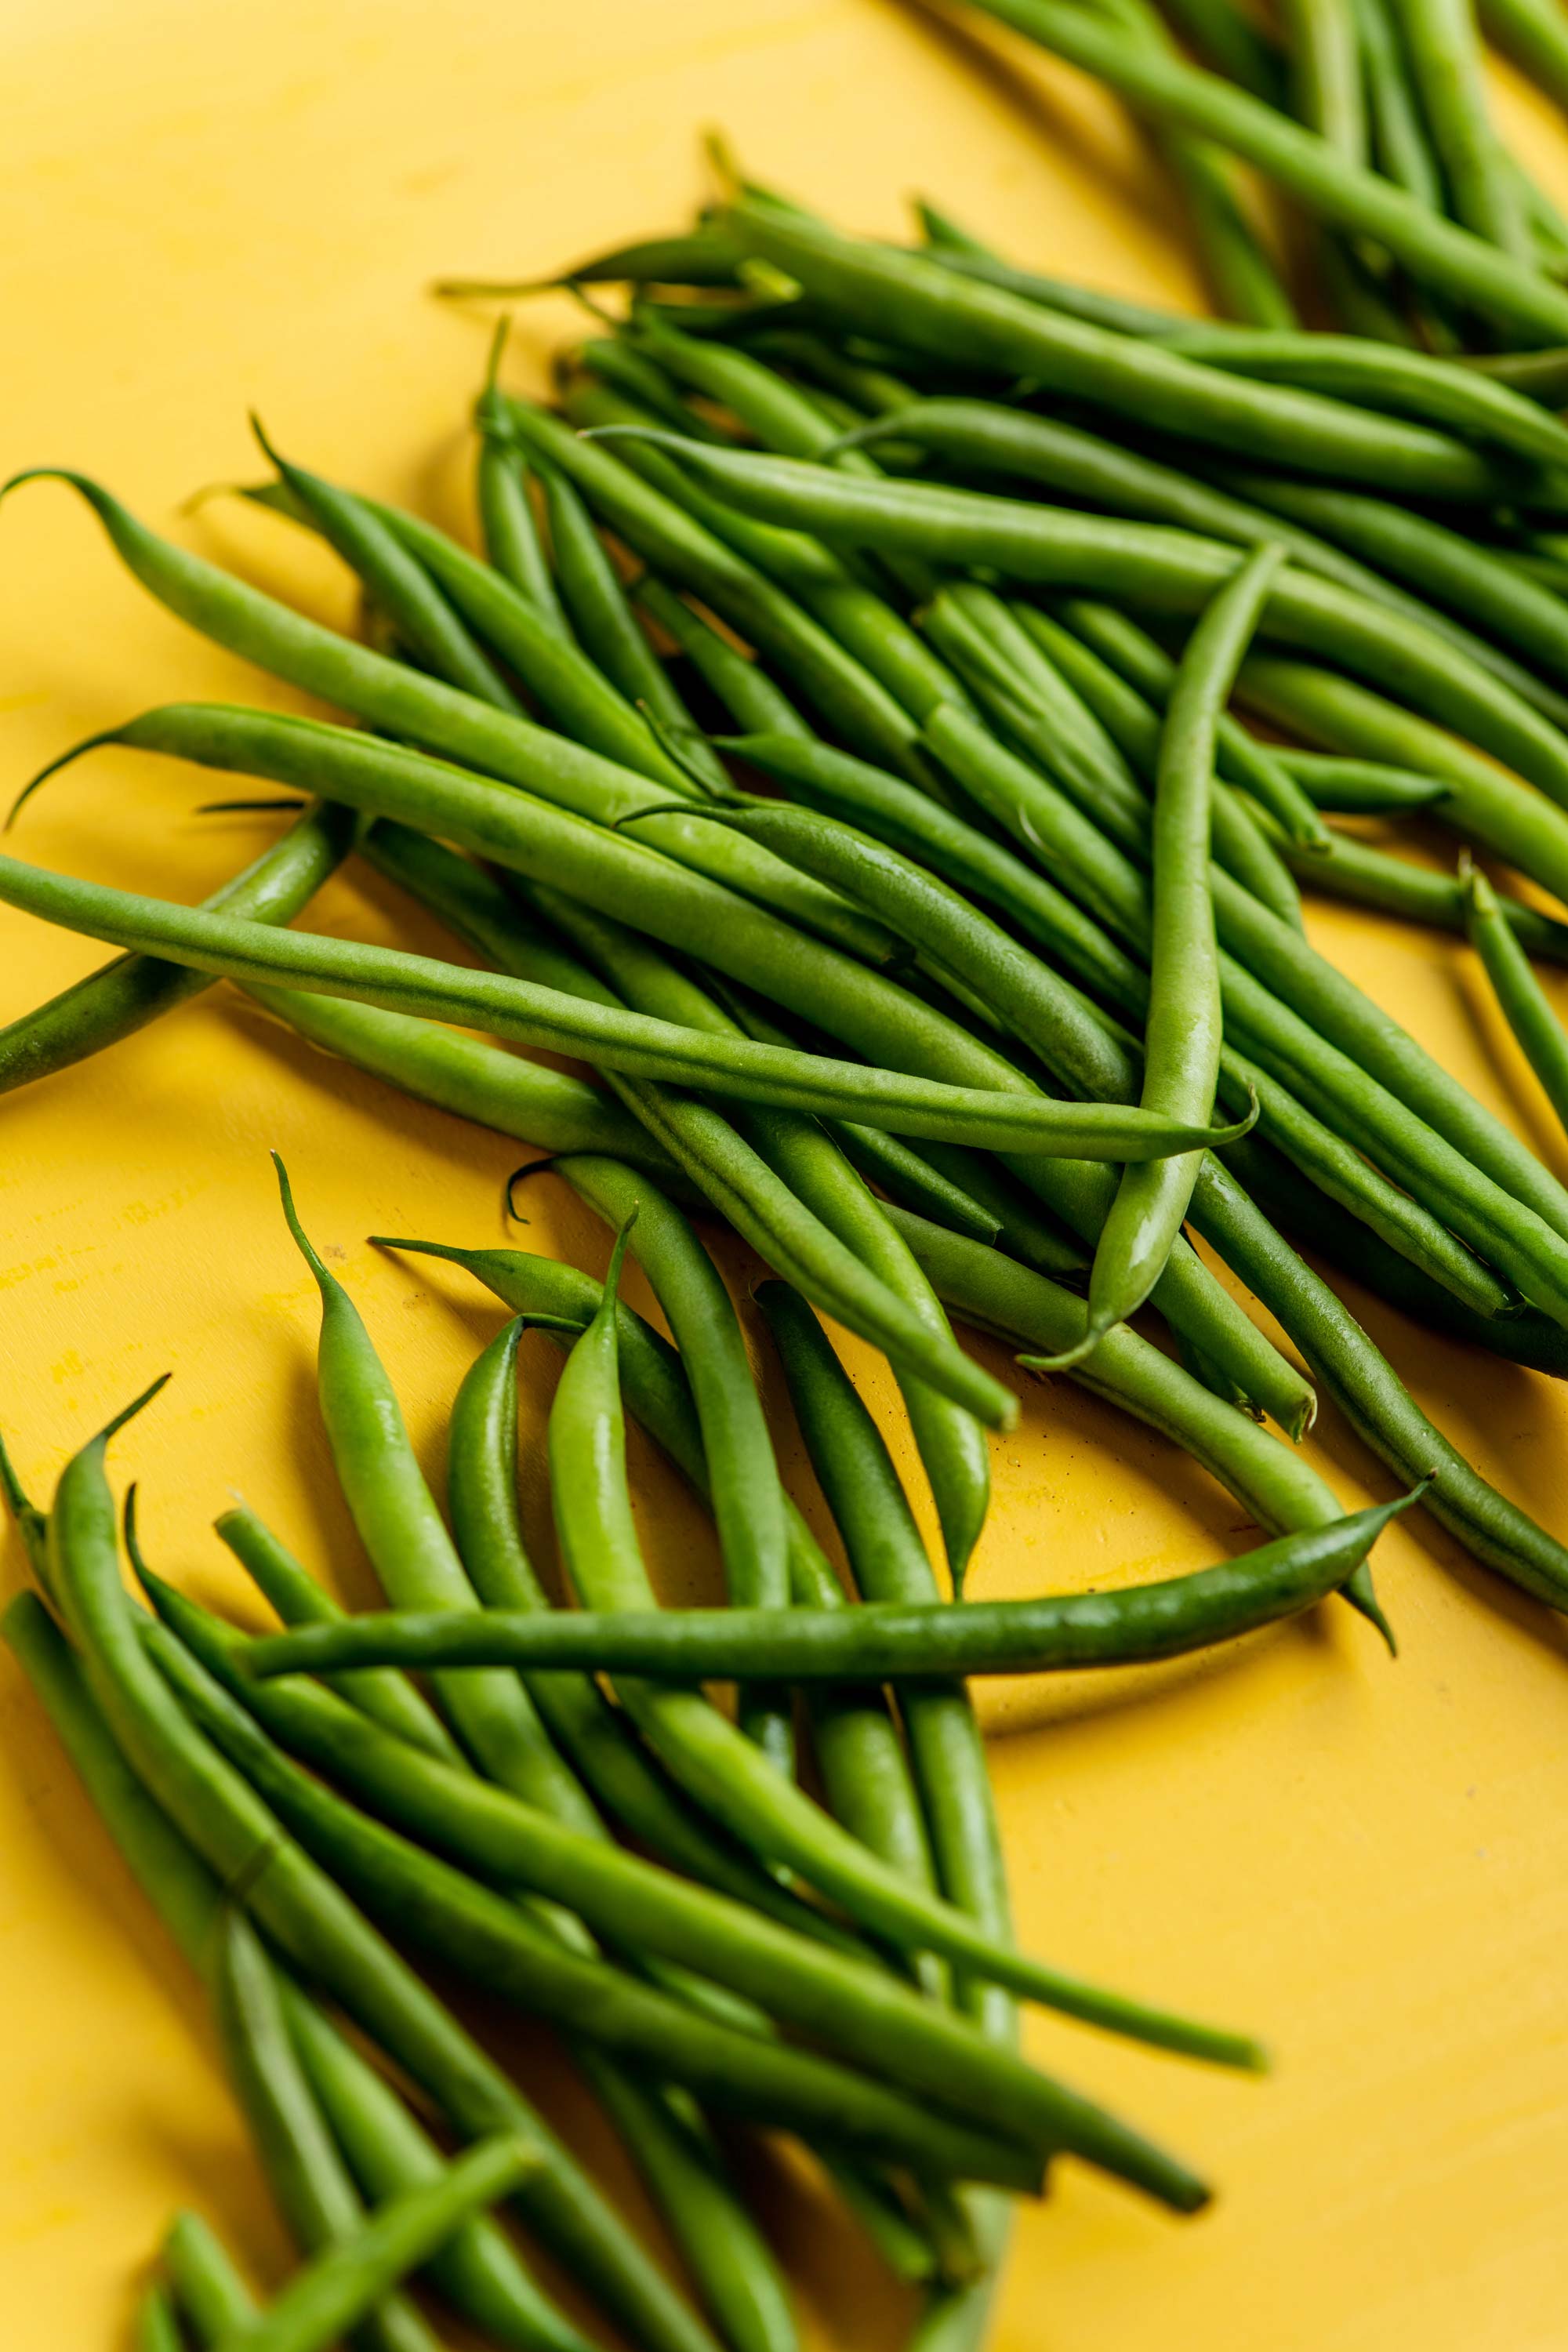 Haricot Verts on a yellow surface.